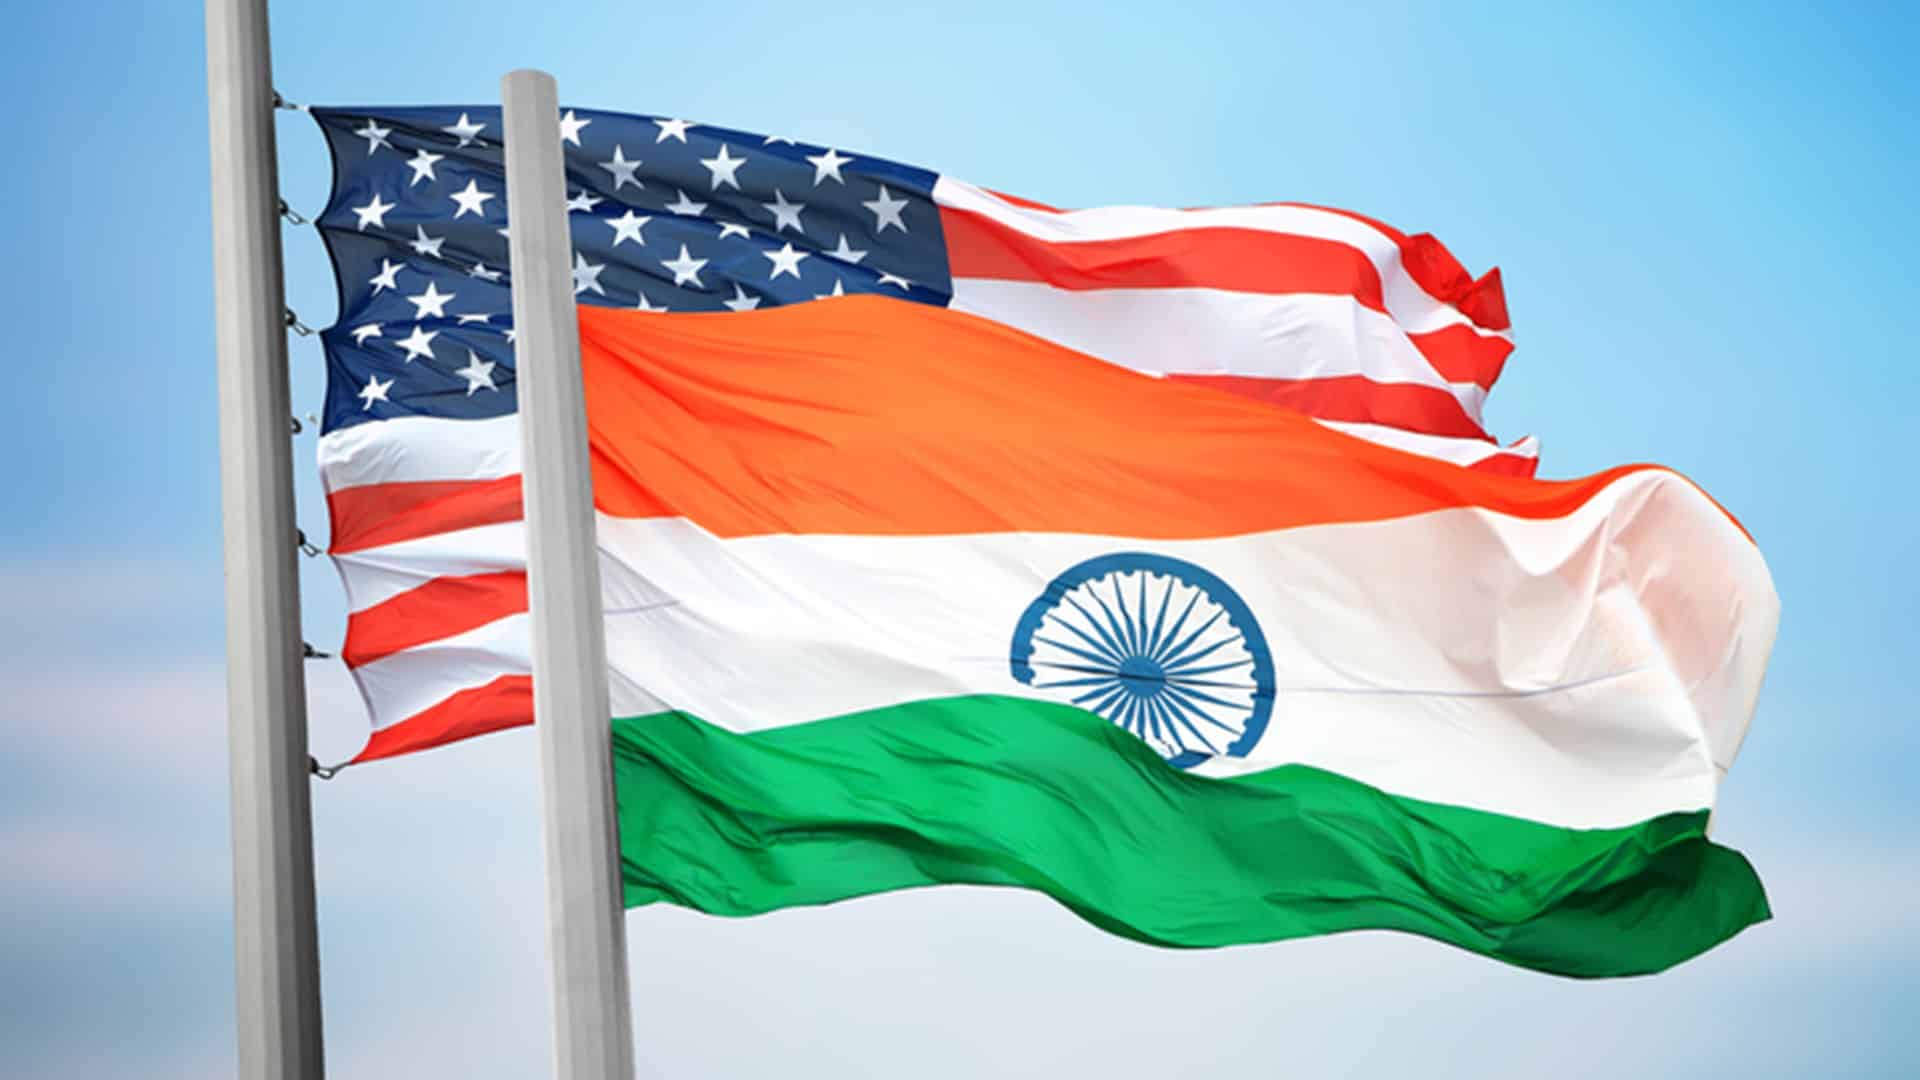 India 'incredibly important' partner to US in the region and globally: White House